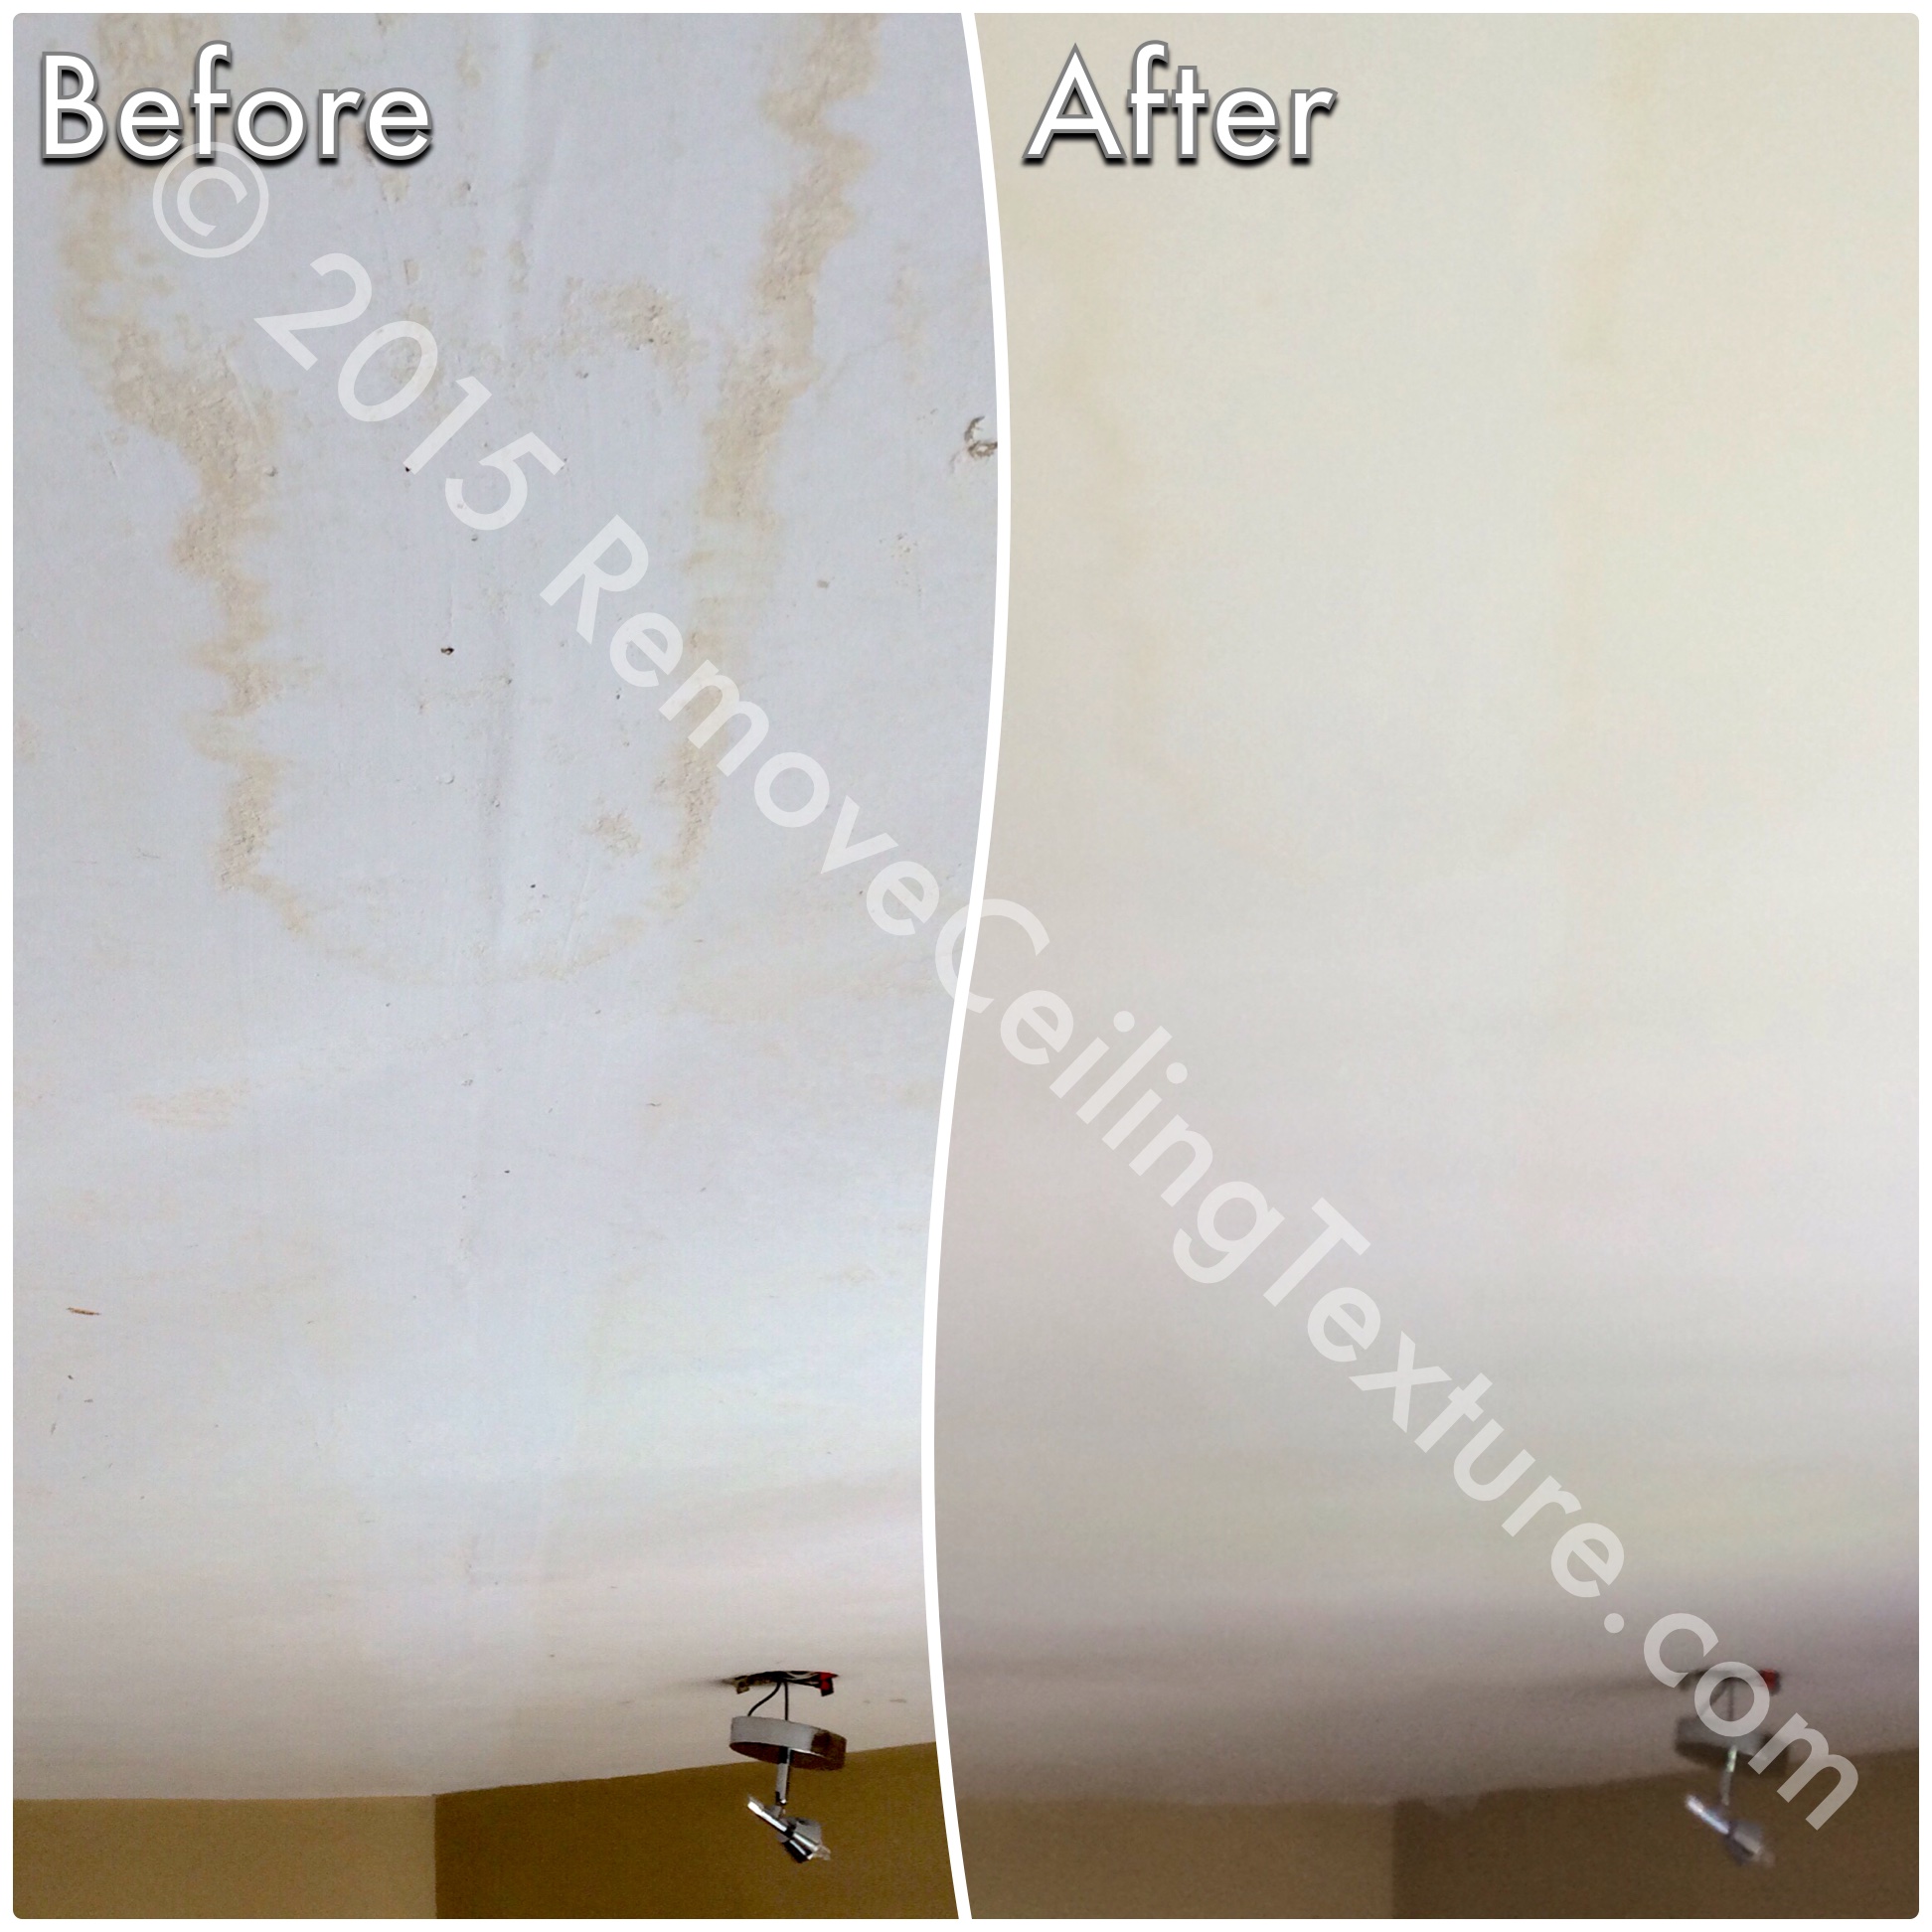 Before: Scraped ceilings are rough and ugly. After: Ceilings have been resurfaced to a smooth finish